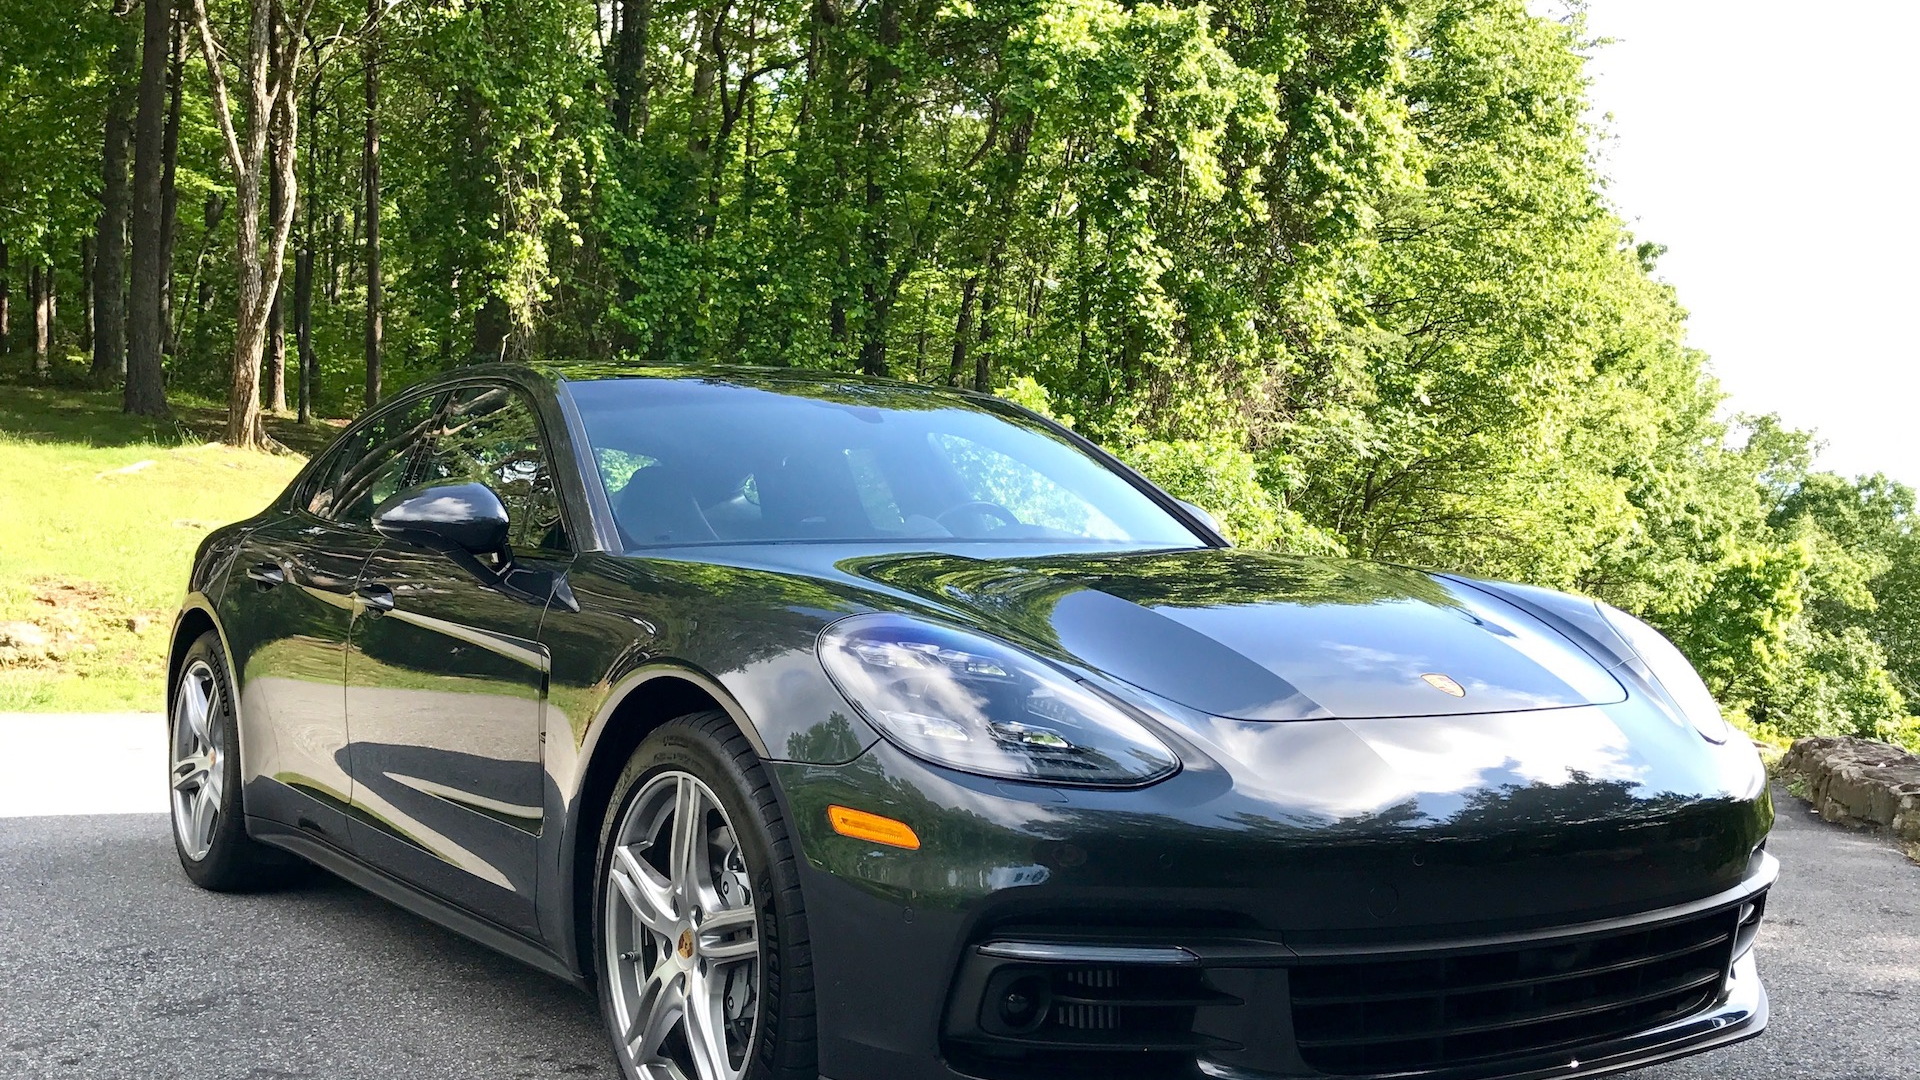 2018 Porsche Panamera 4S first drive review: the quiet heretic